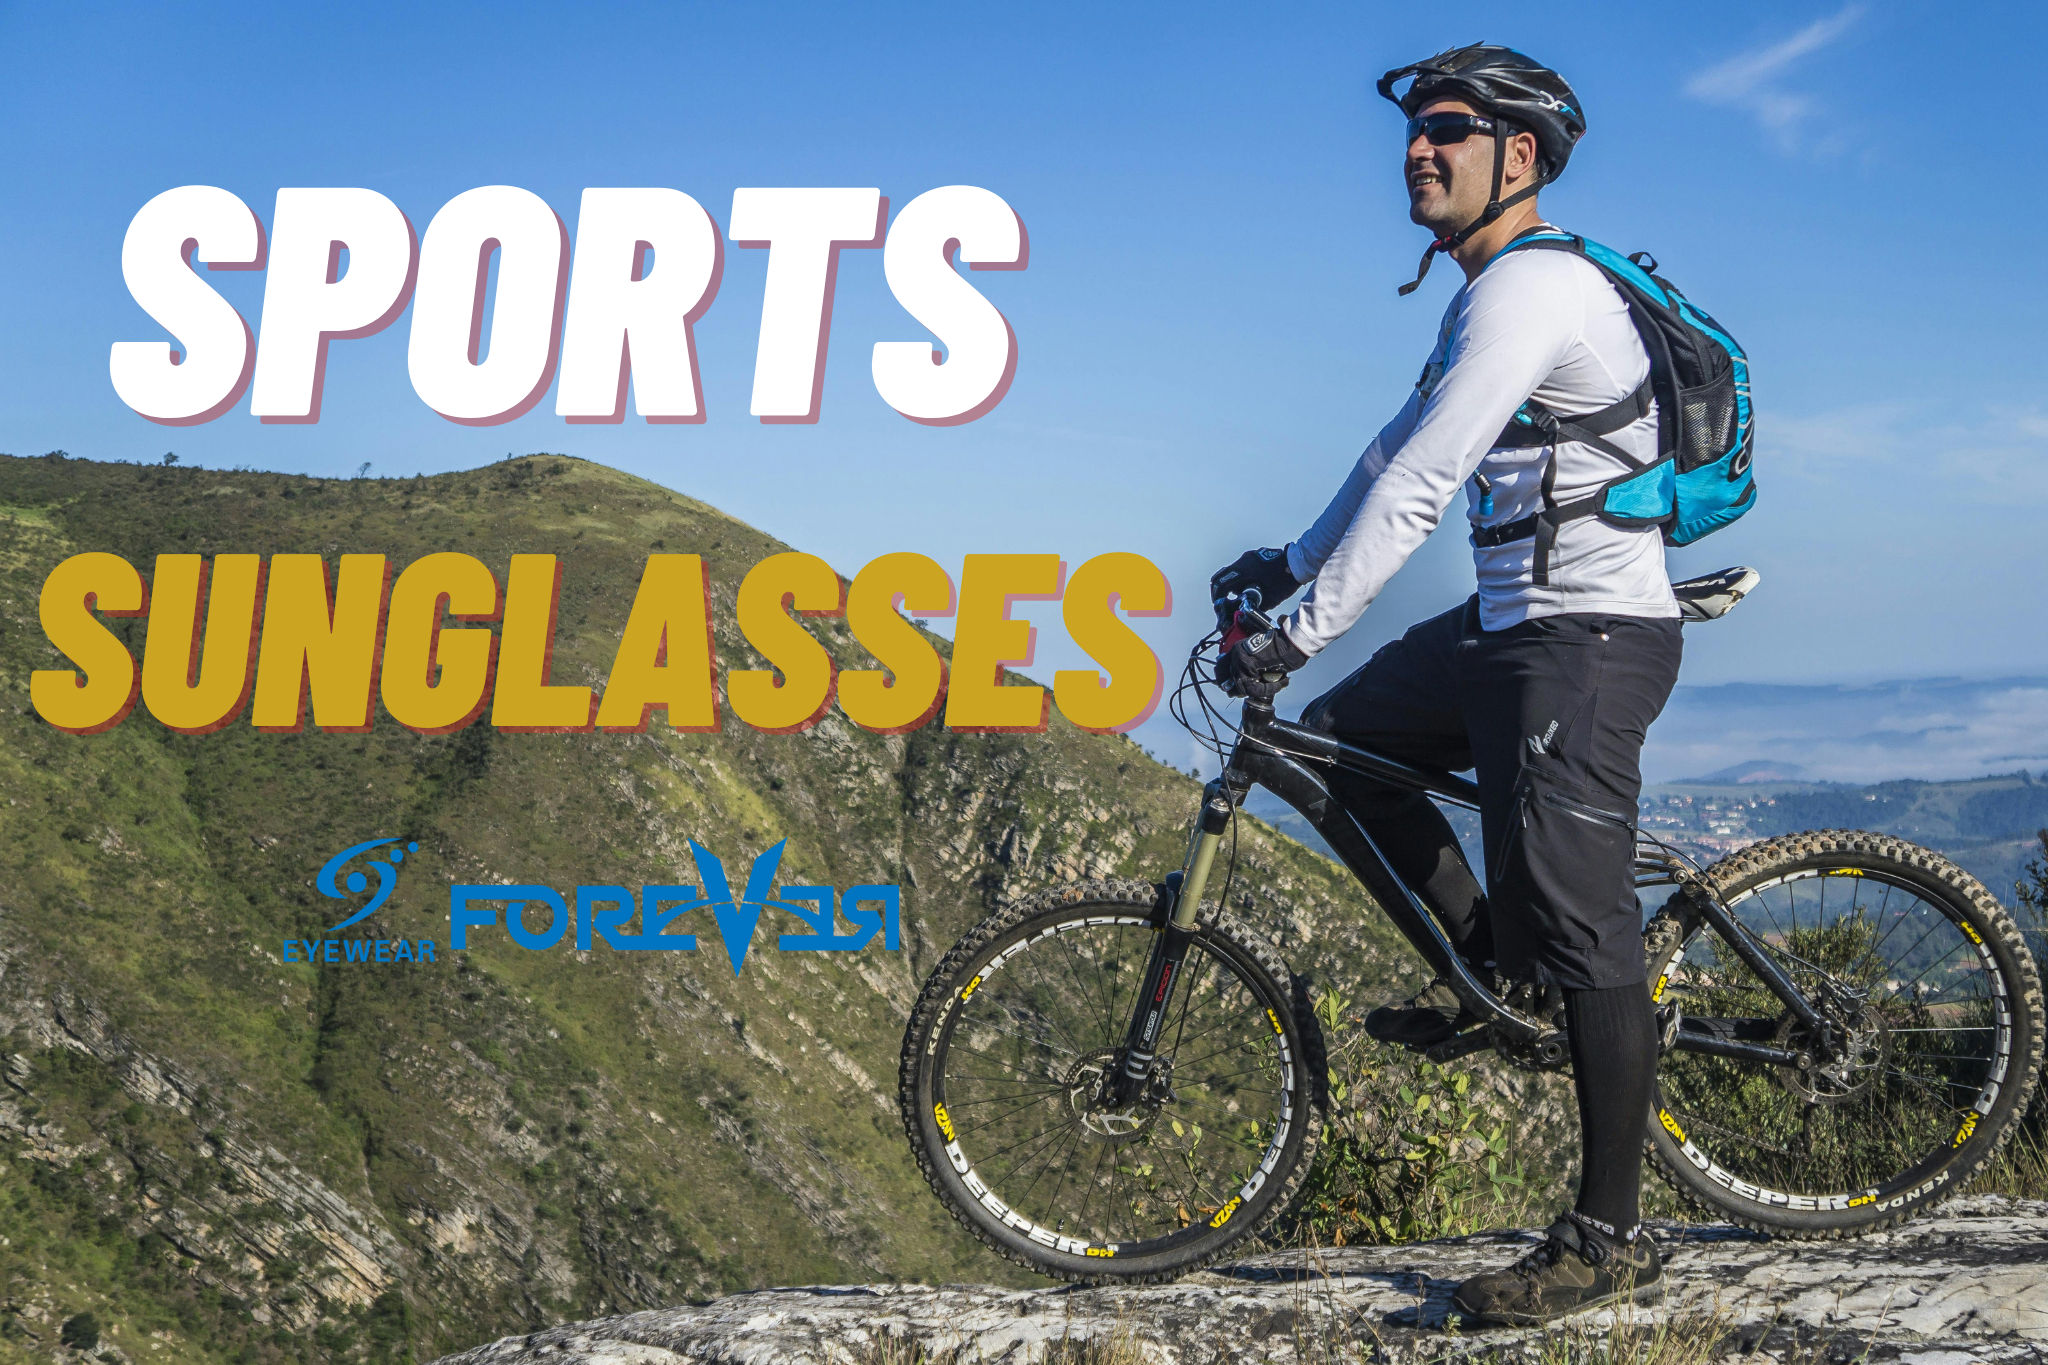 Sports Sunglasses: Choosing The Right Ones